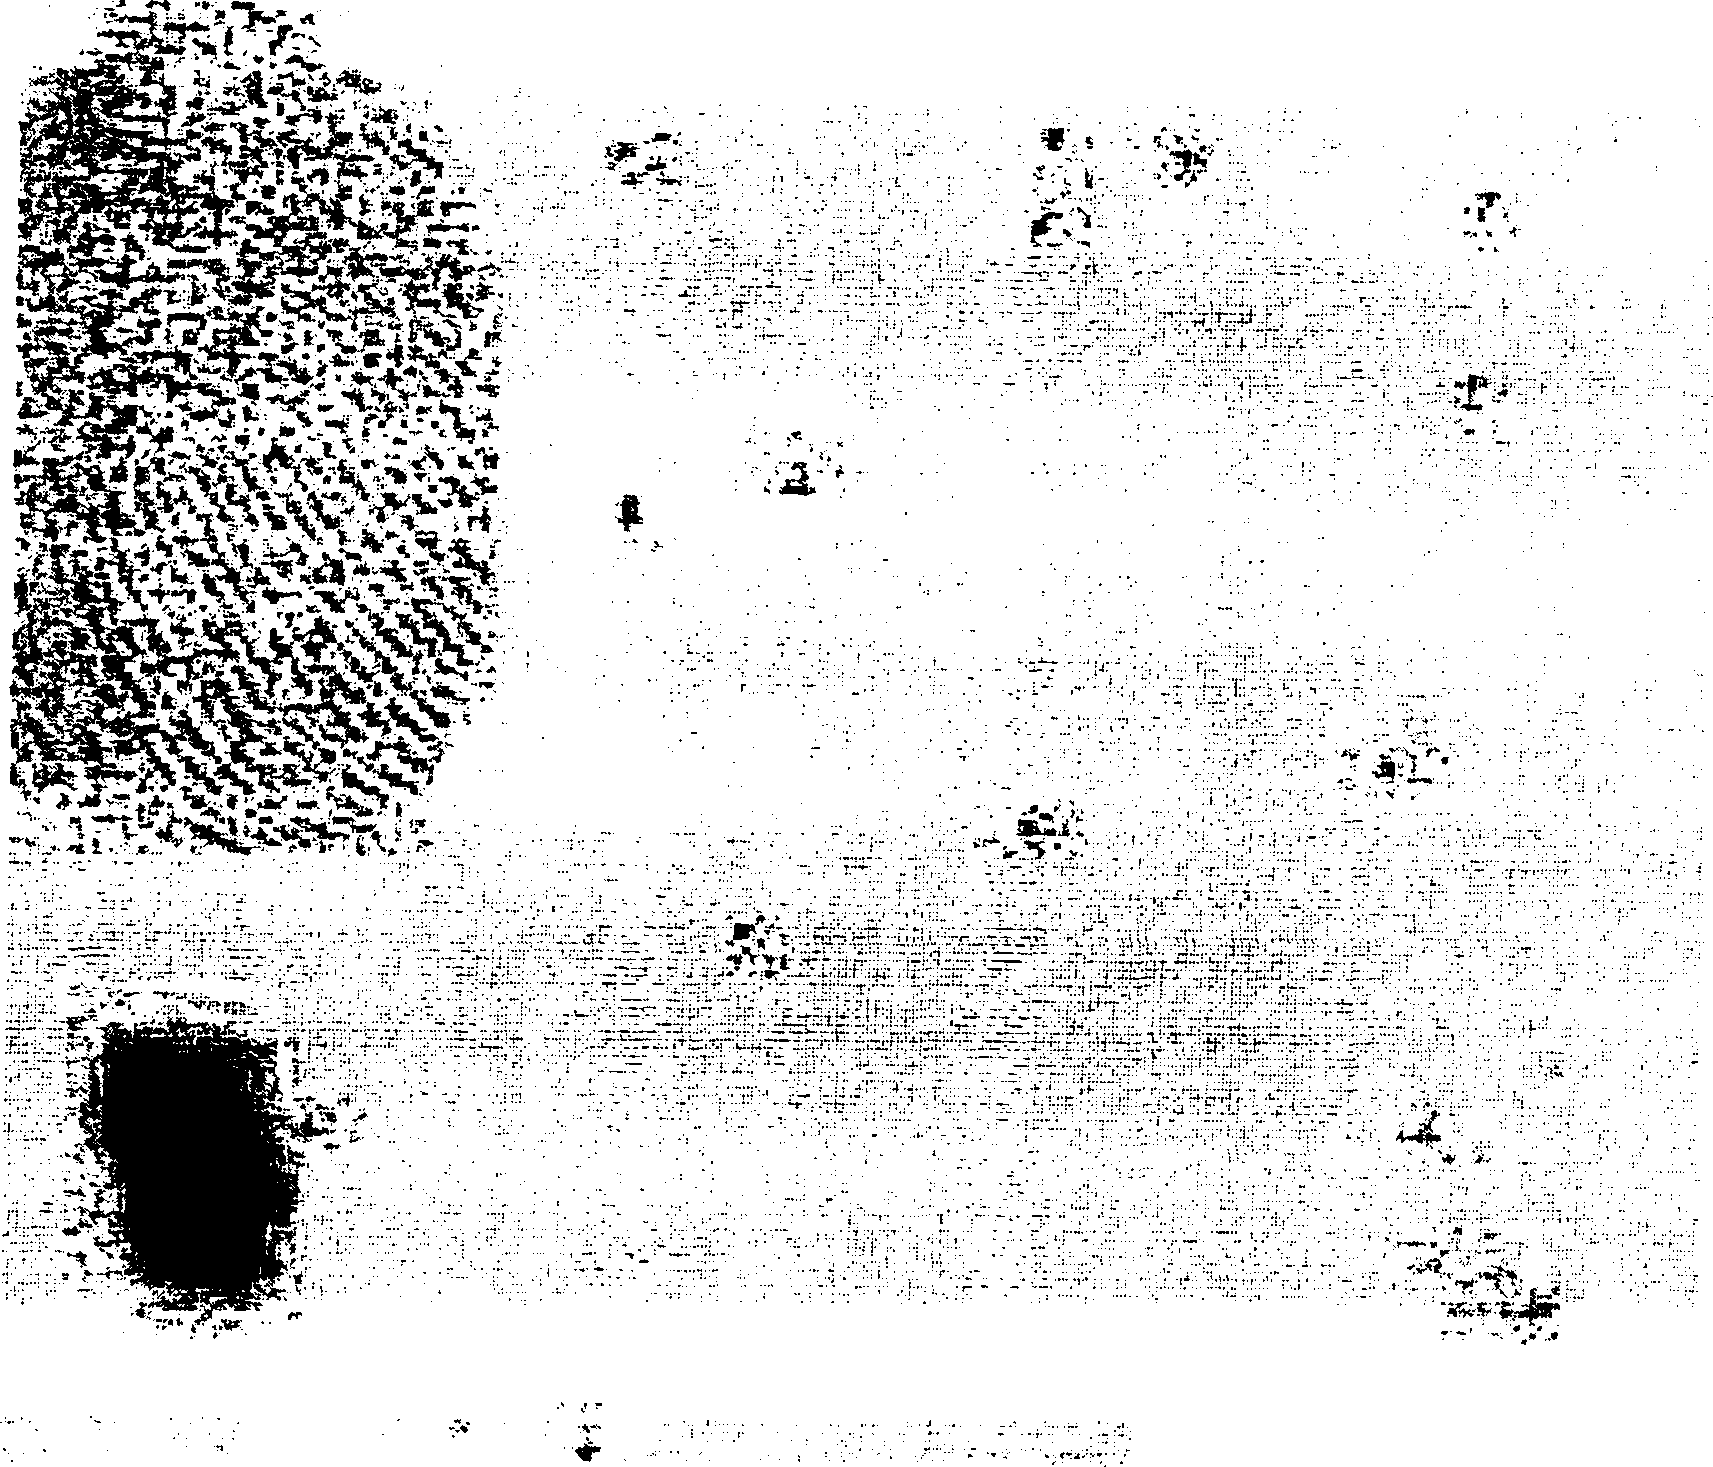 Acquisition and splicing method of three-face rolling fingerprint